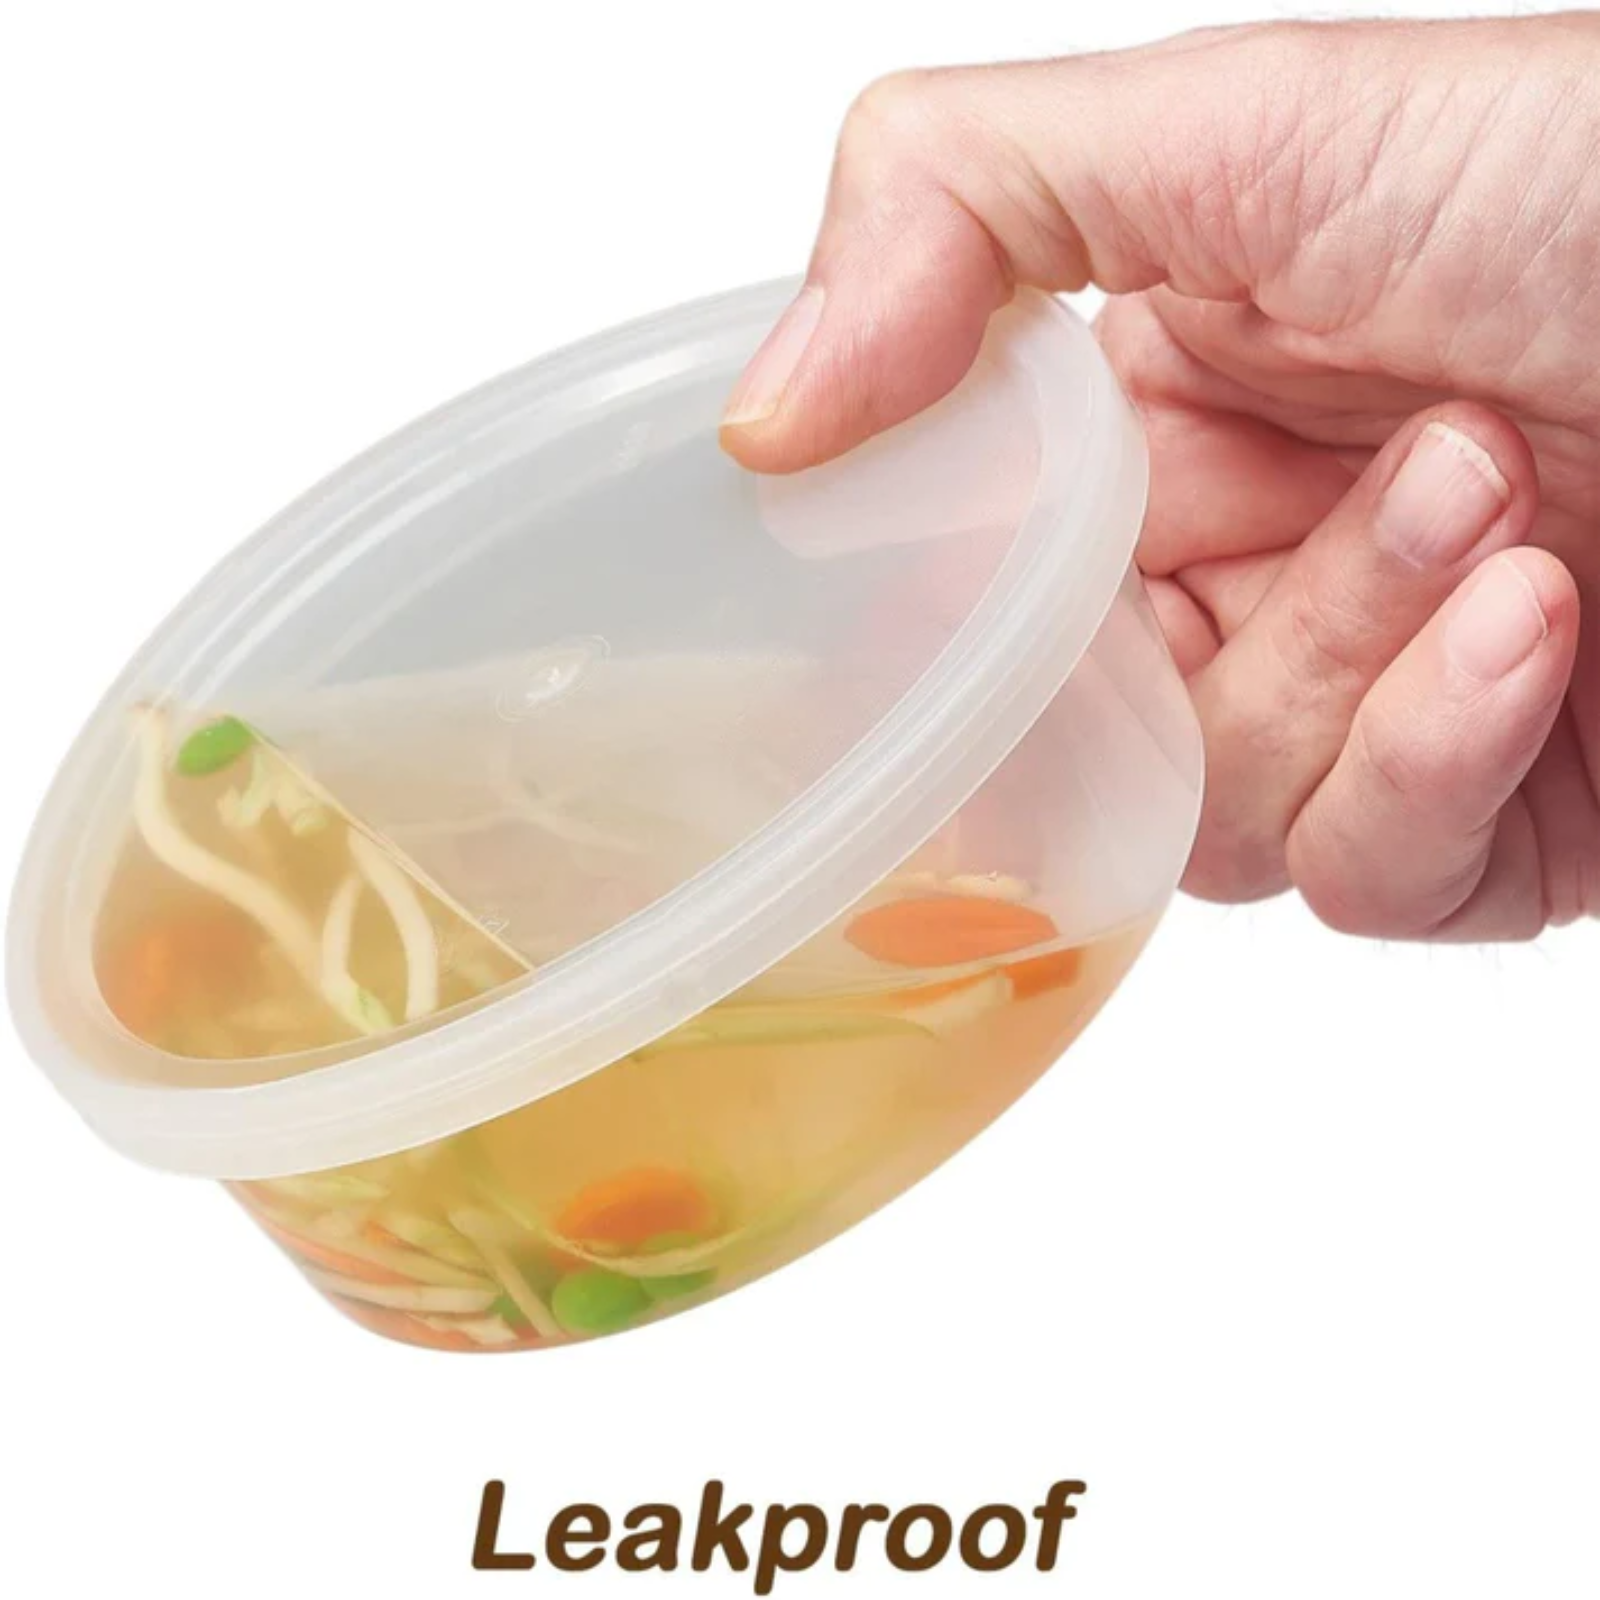 8oz Extra Strong Quality Heavyweight Deli Container with Lid Food Storage & Serving VeZee   